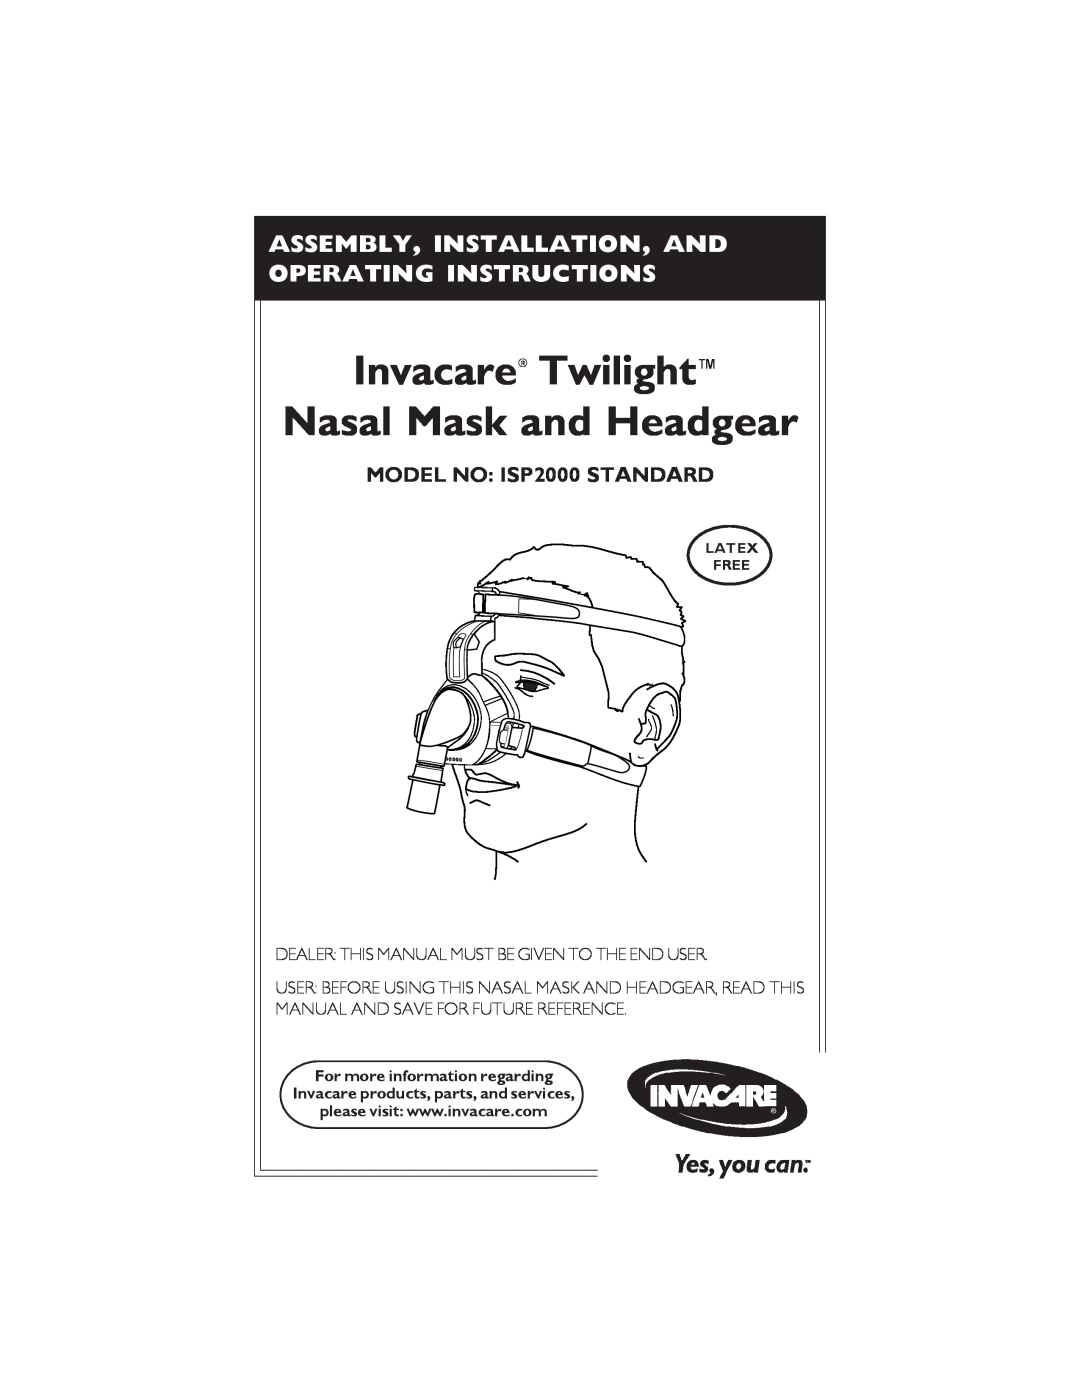 Invacare ISP2000 operating instructions Invacare Twilight Nasal Mask and Headgear, Latex Free 